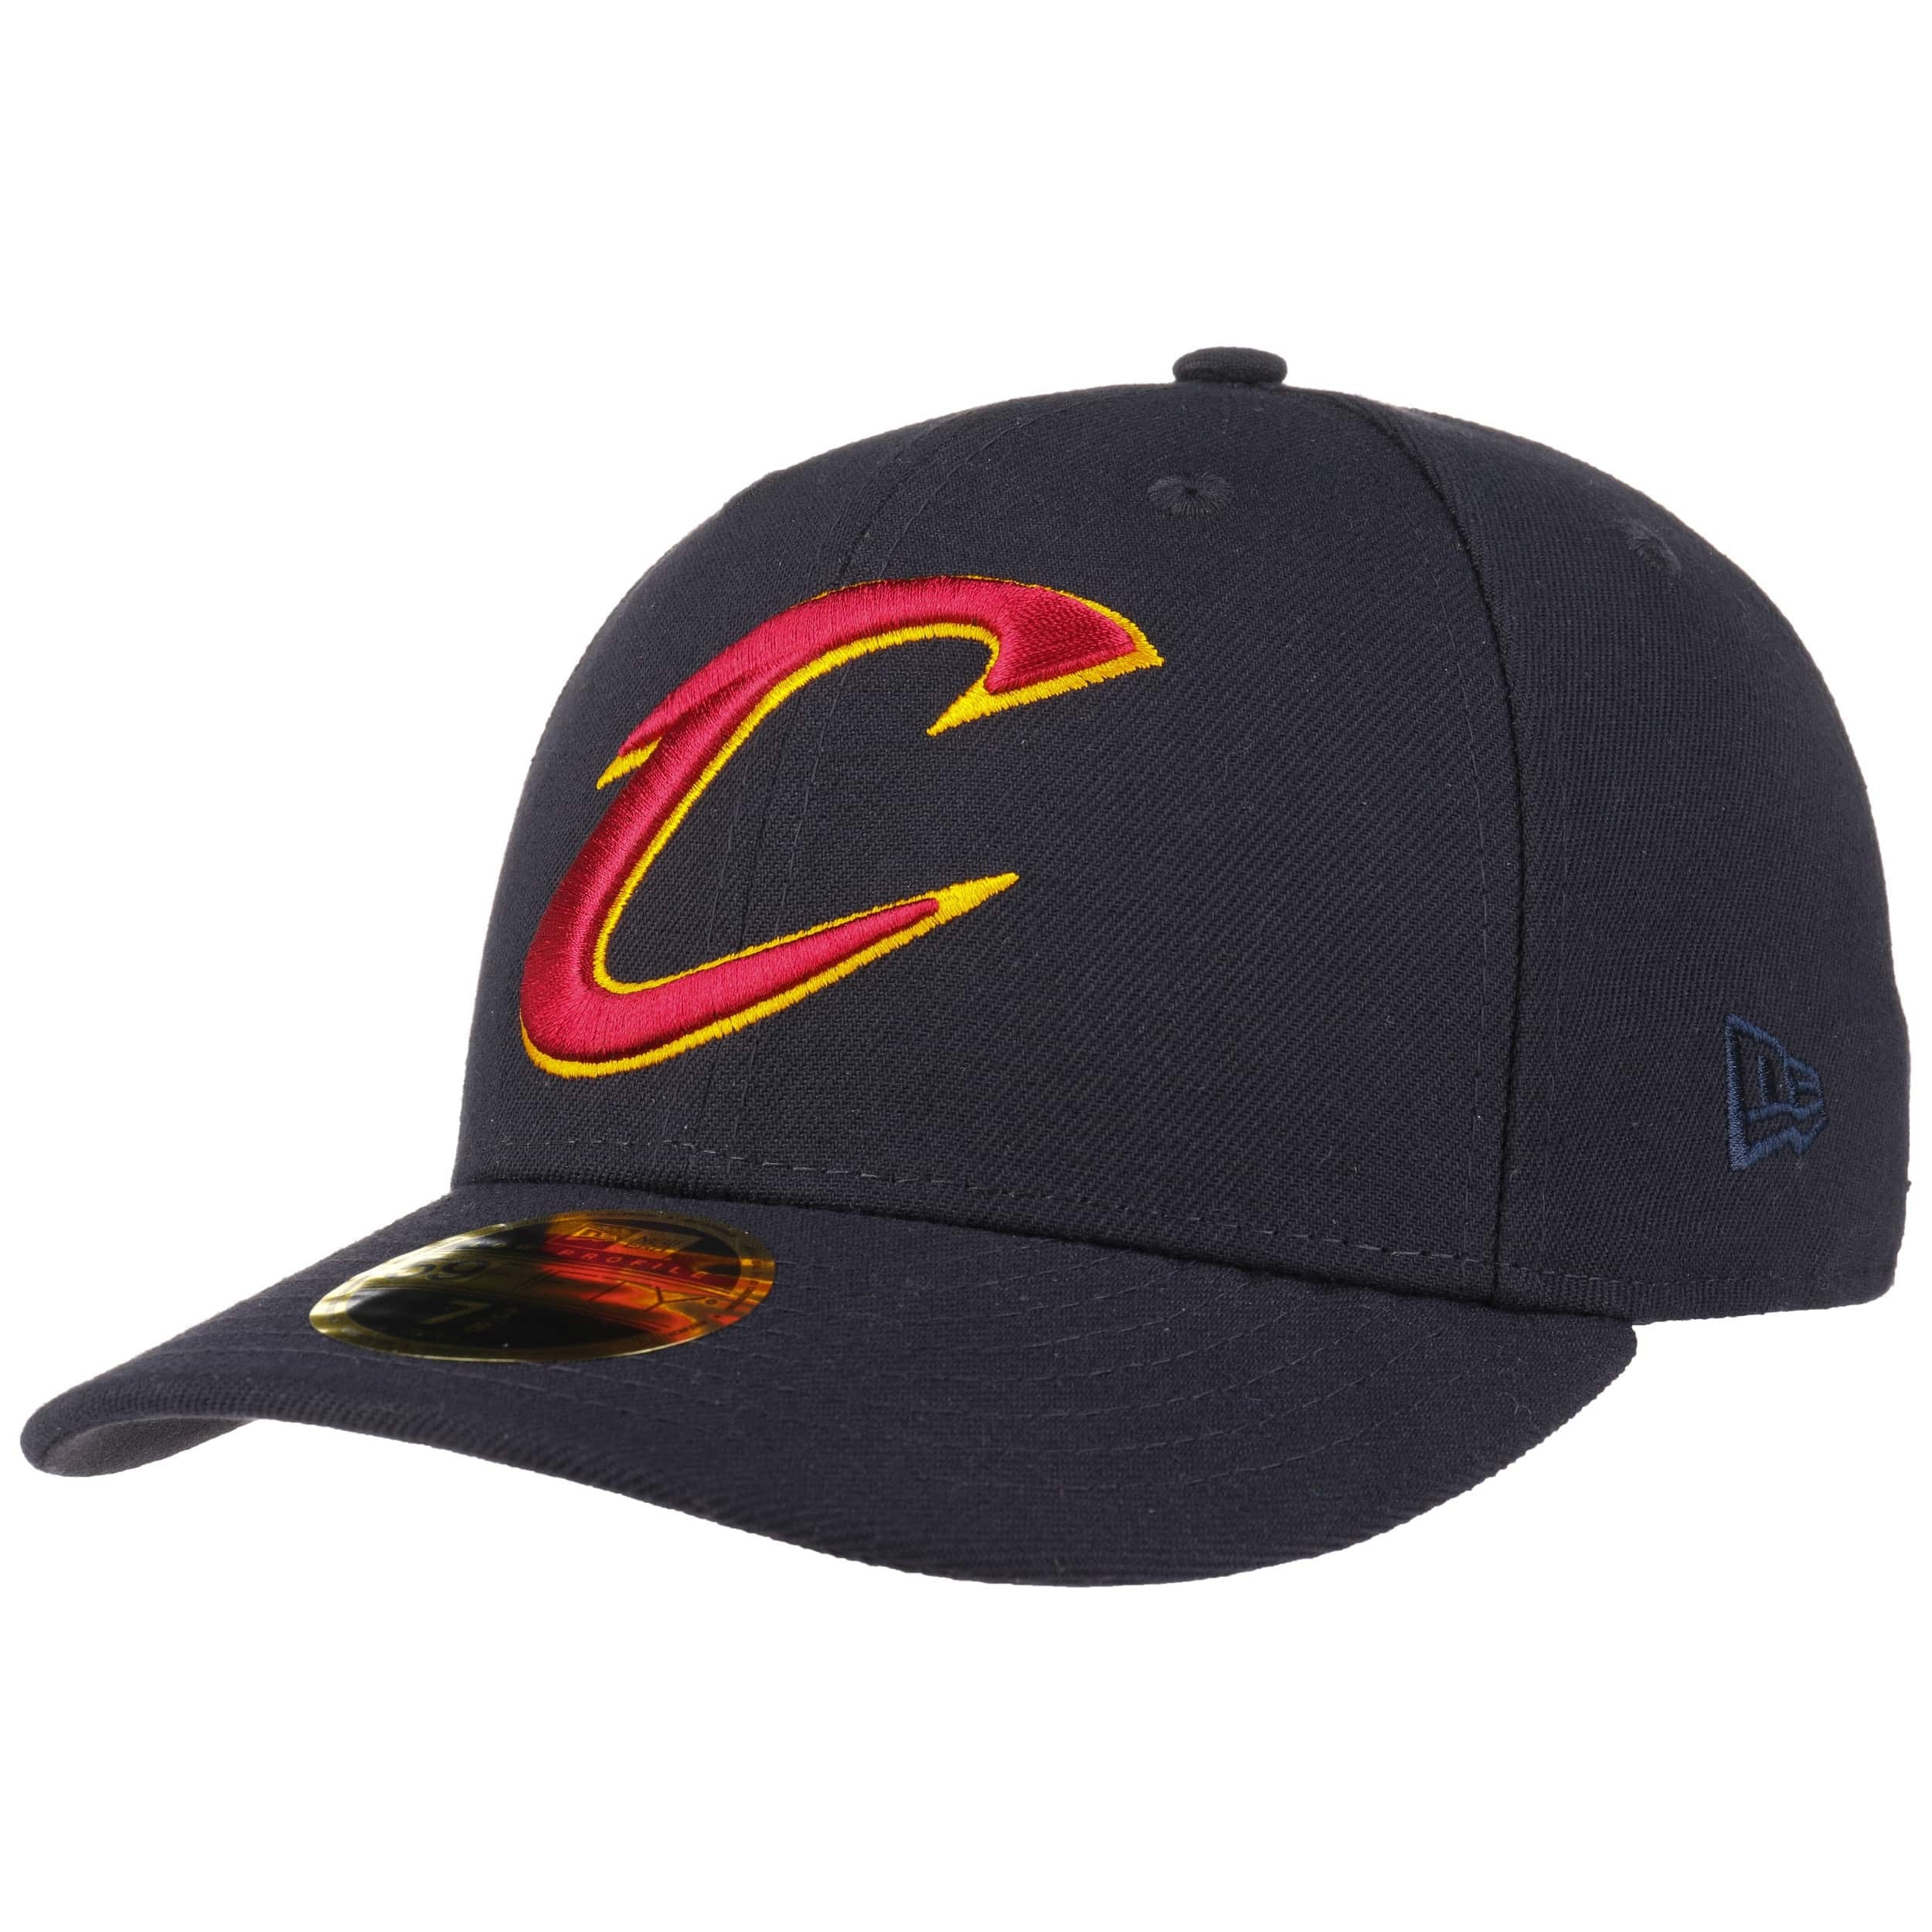 59Fifty Low Profile Cavs Cap by New Era - 31,95